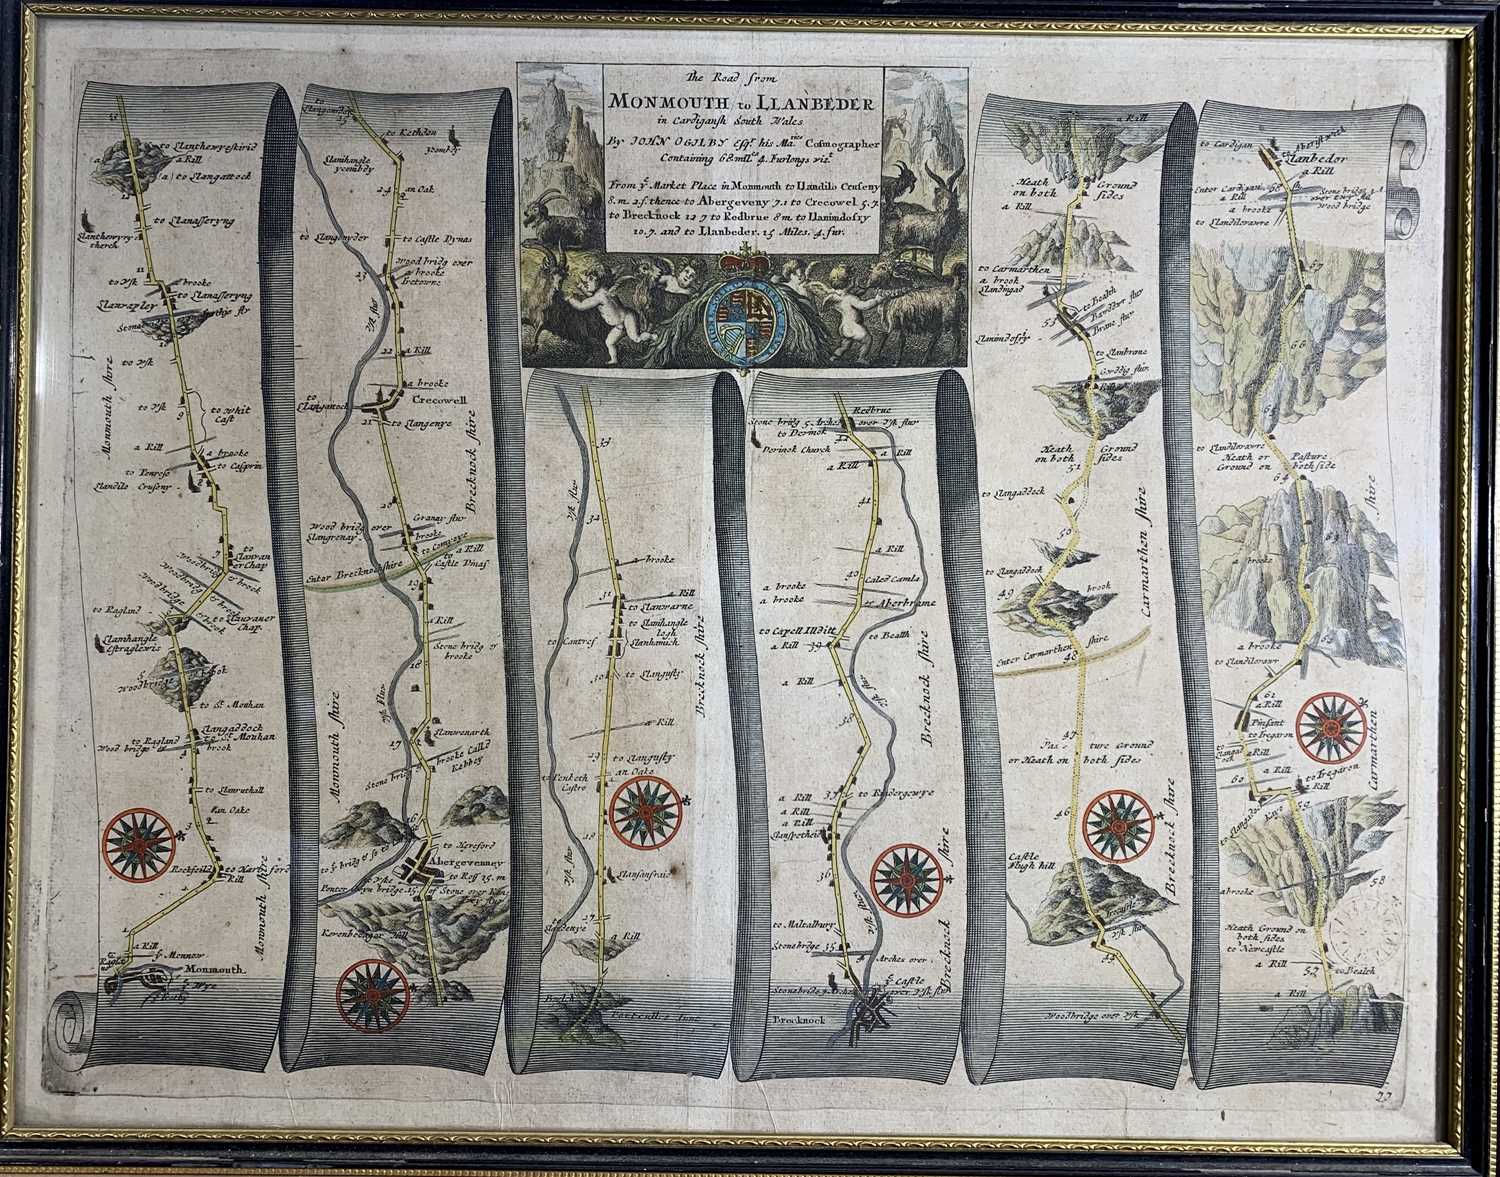 18th century road maps, hand colouredMonmouth to Llanbeder by John Ogilby35.5x45.5cmTogether with